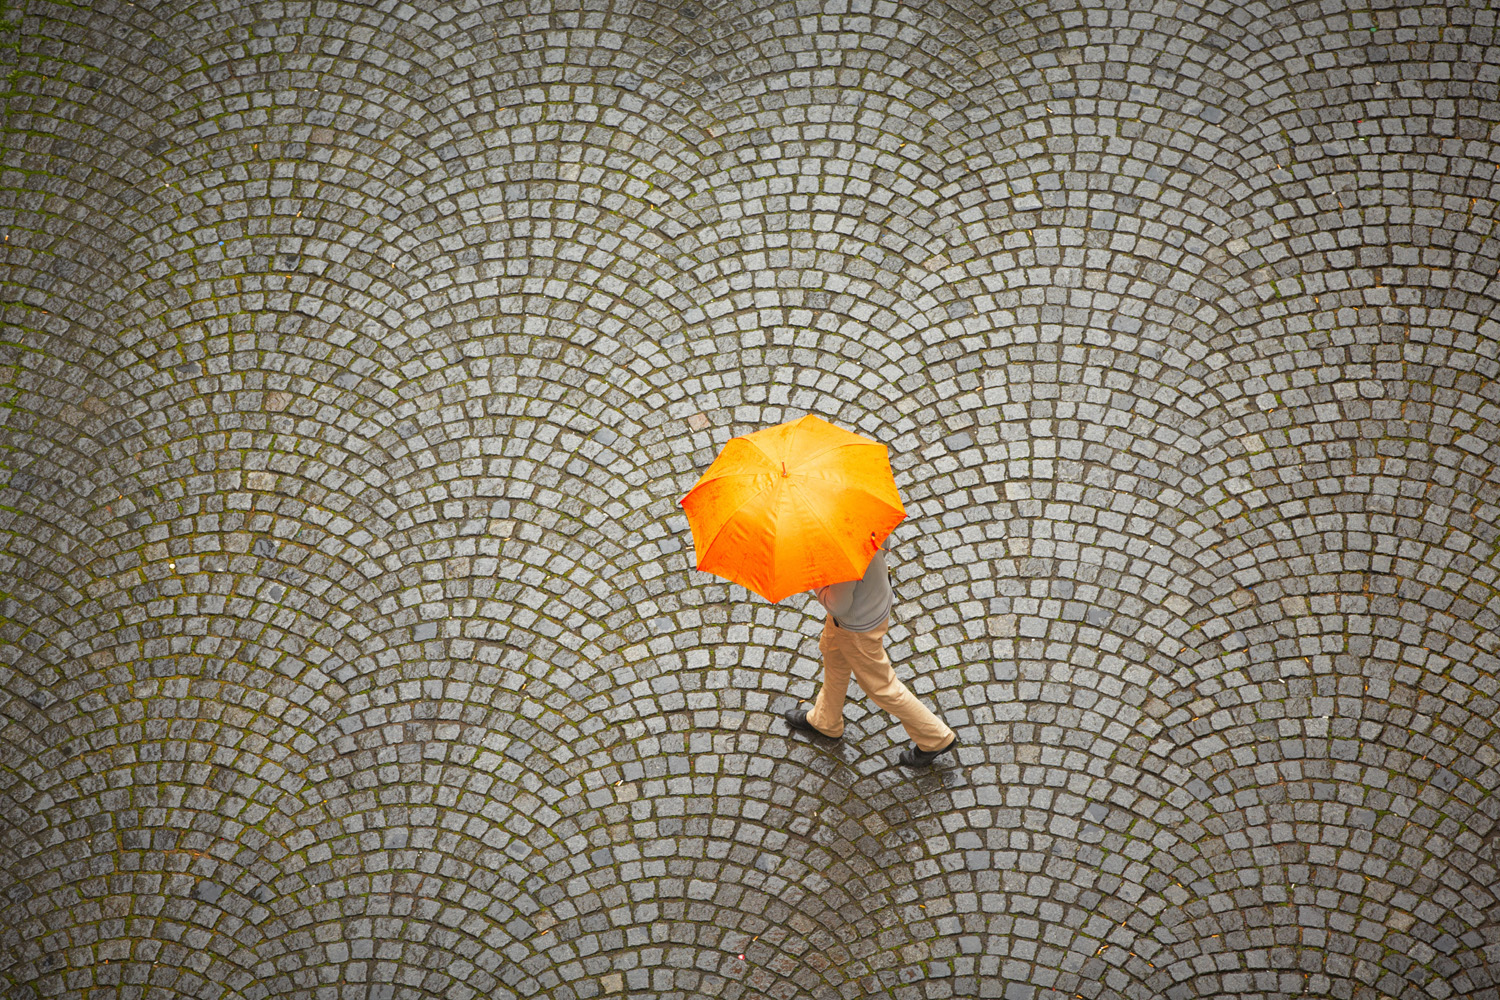 High shot of man with orange umbrella in rain against patterned stone pavement